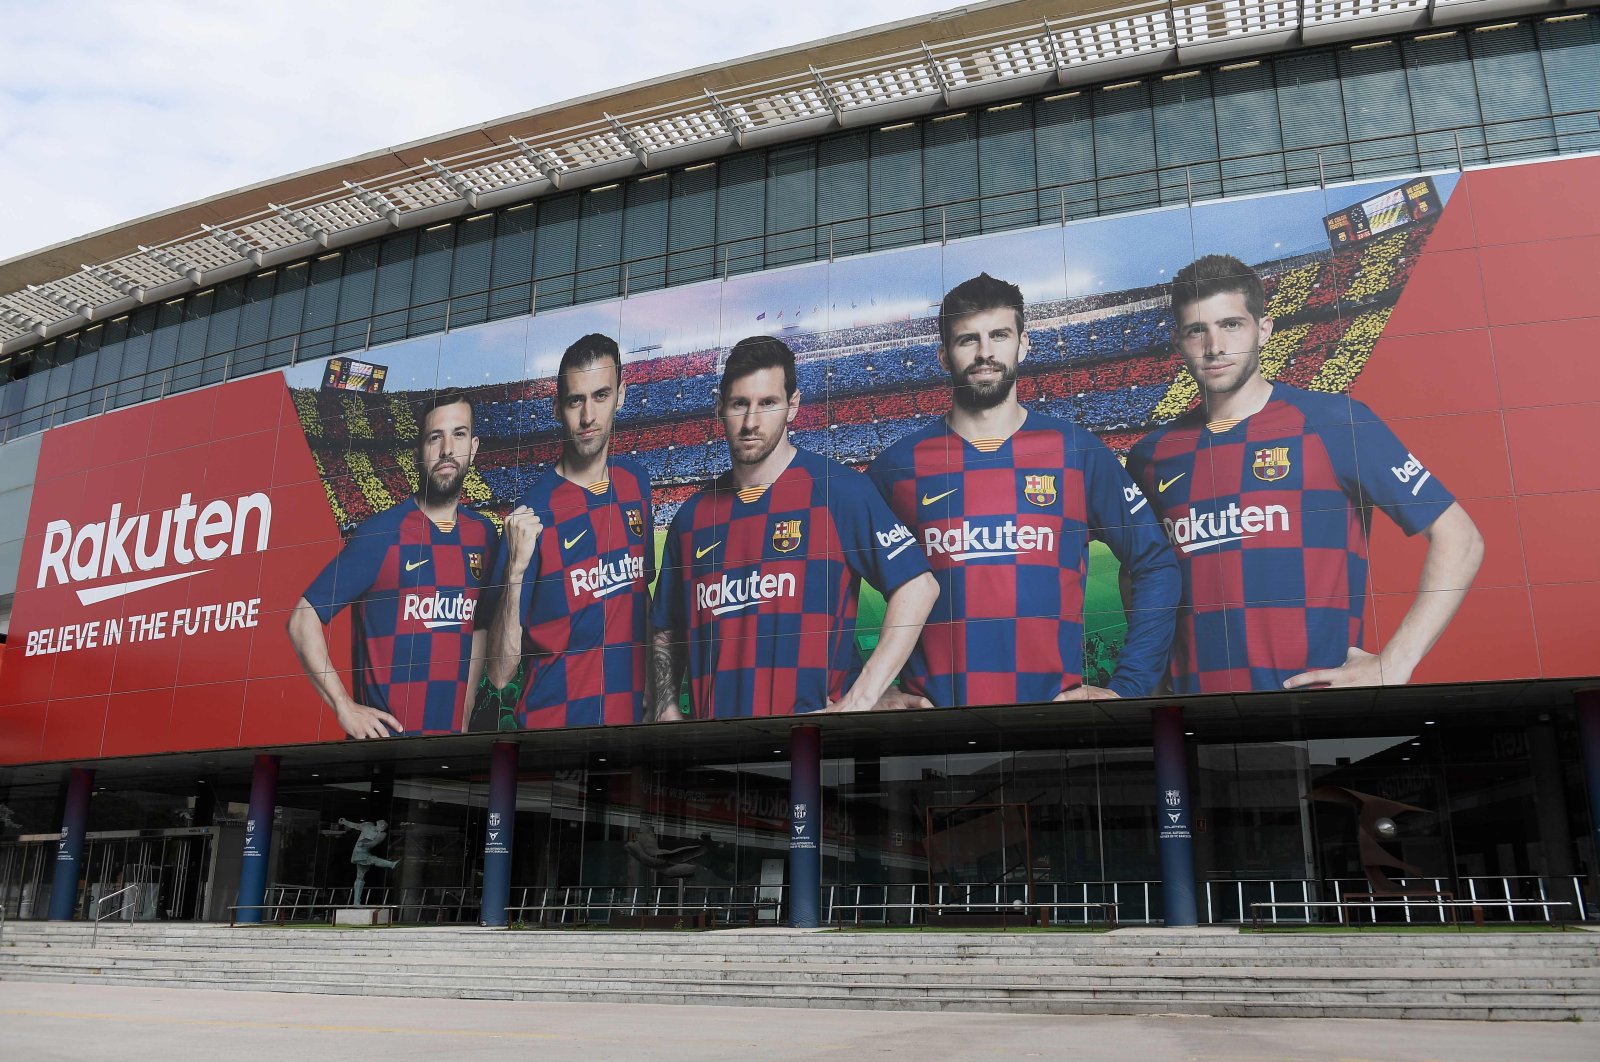 A picture shows the empty entrance to the Camp Nou stadium in Barcelona on March 13, after La Liga said Spain's top two divisions would be suspended for at least two weeks over the coronavirus outbreak. (AFP Photo)